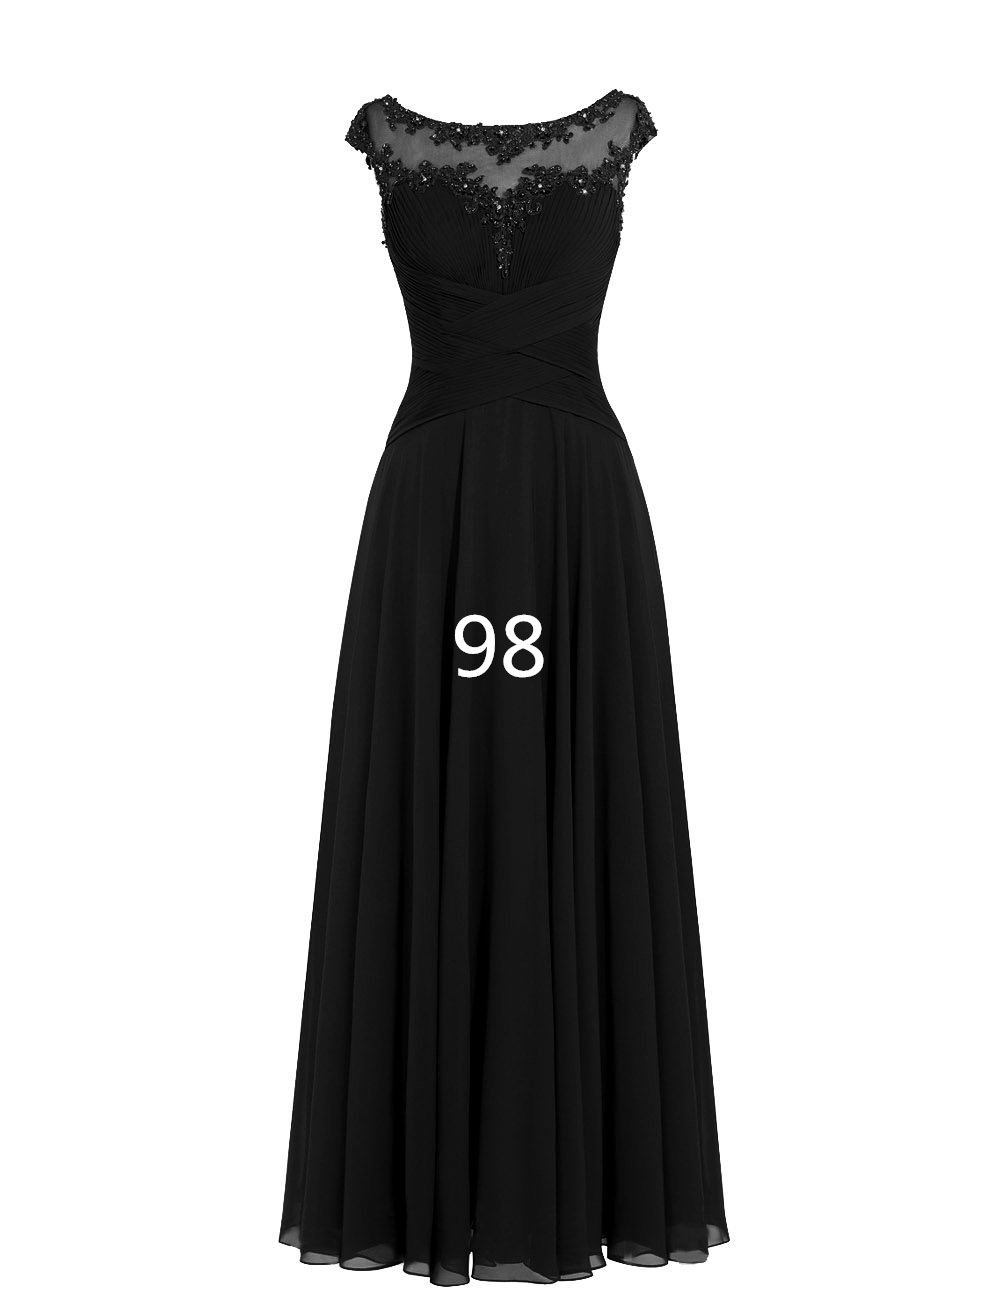 Women Sleveless Embroidered Chiffon Bridesmaid Dress Long Party Pageant Wedding Formal Dress - Black